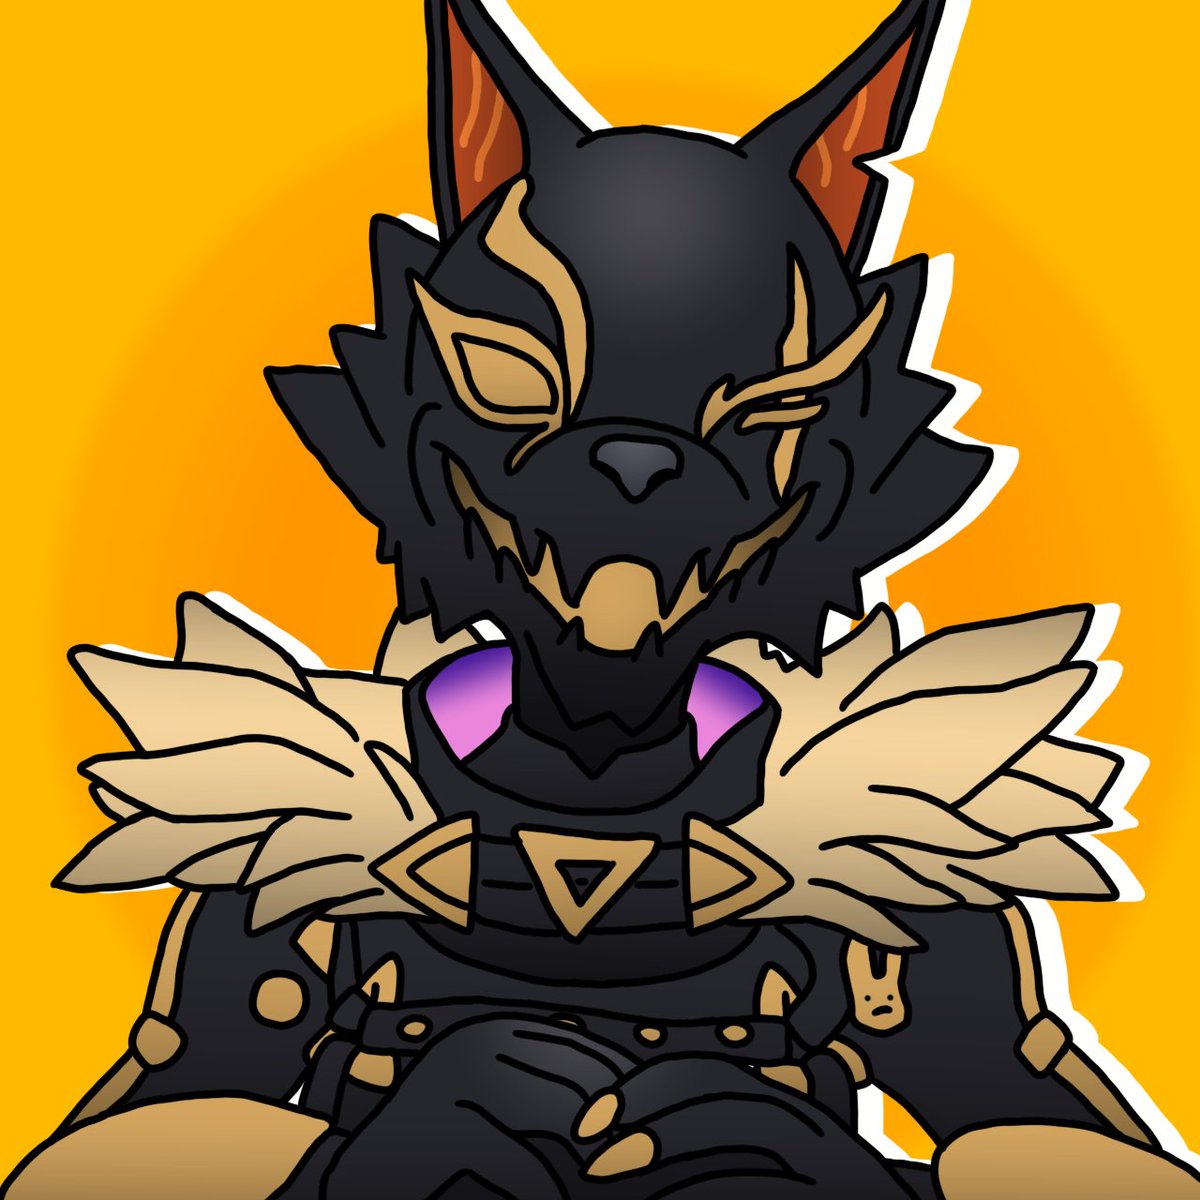 Golden Highwire is my new main, it just fits so well 🤩
#NewProfilePic